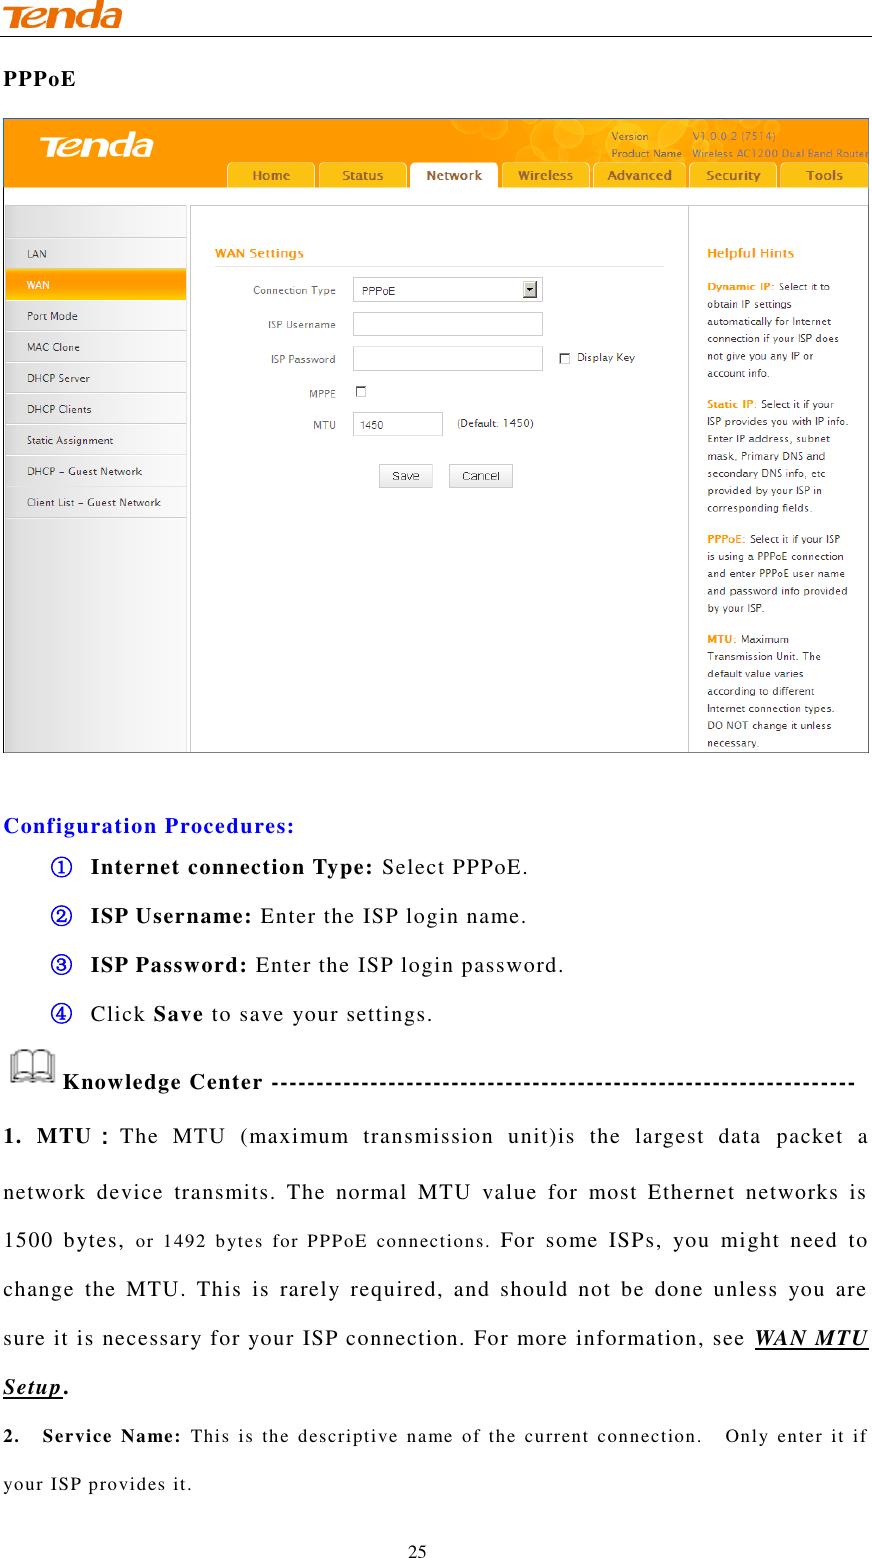                                    25 PPPoE   Configuration Procedures: ① Internet connection Type: Select PPPoE. ② ISP Username: Enter the ISP login name. ③ ISP Password: Enter the ISP login password. ④ Click Save to save your settings. Knowledge Center ----------------------------------------------------------------- 1.  MTU：The  MTU  (maximum  transmission  unit)is  the  largest  data  packet  a network  device  transmits.  The  normal  MTU  value  for  most  Ethernet  networks  is 1500  bytes,  or  1492  bytes  for  PPPoE  connections.  For  some  ISPs,  you  might  need  to change  the  MTU.  This  is  rarely  required,  and  should  not  be  done  unless  you  are sure it is necessary for your ISP connection. For more information, see  WAN MTU Setup. 2.    Service  Name:  This  is  the  descriptive  name  of  the  current  connection.    Only  enter  it  if your ISP provides it. 